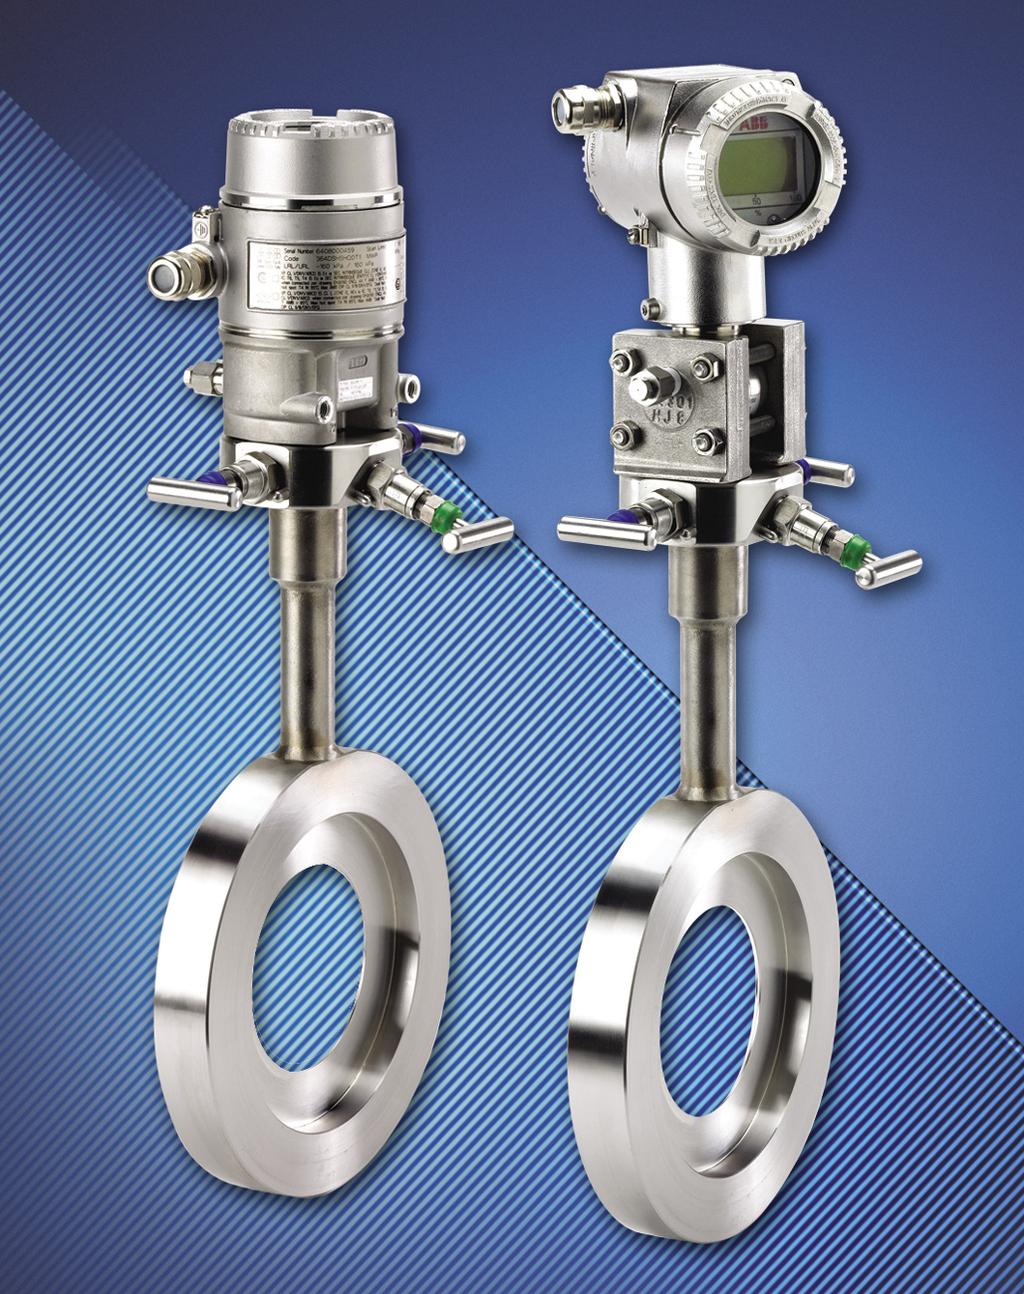 Data Sheet DS/OM Issue 2 Compact Orifice Flow Meter OriMaster Integrated DP Flow measurement system combines primary element with DP Transmitter in a single flowmeter assembly One-piece flowmeter,